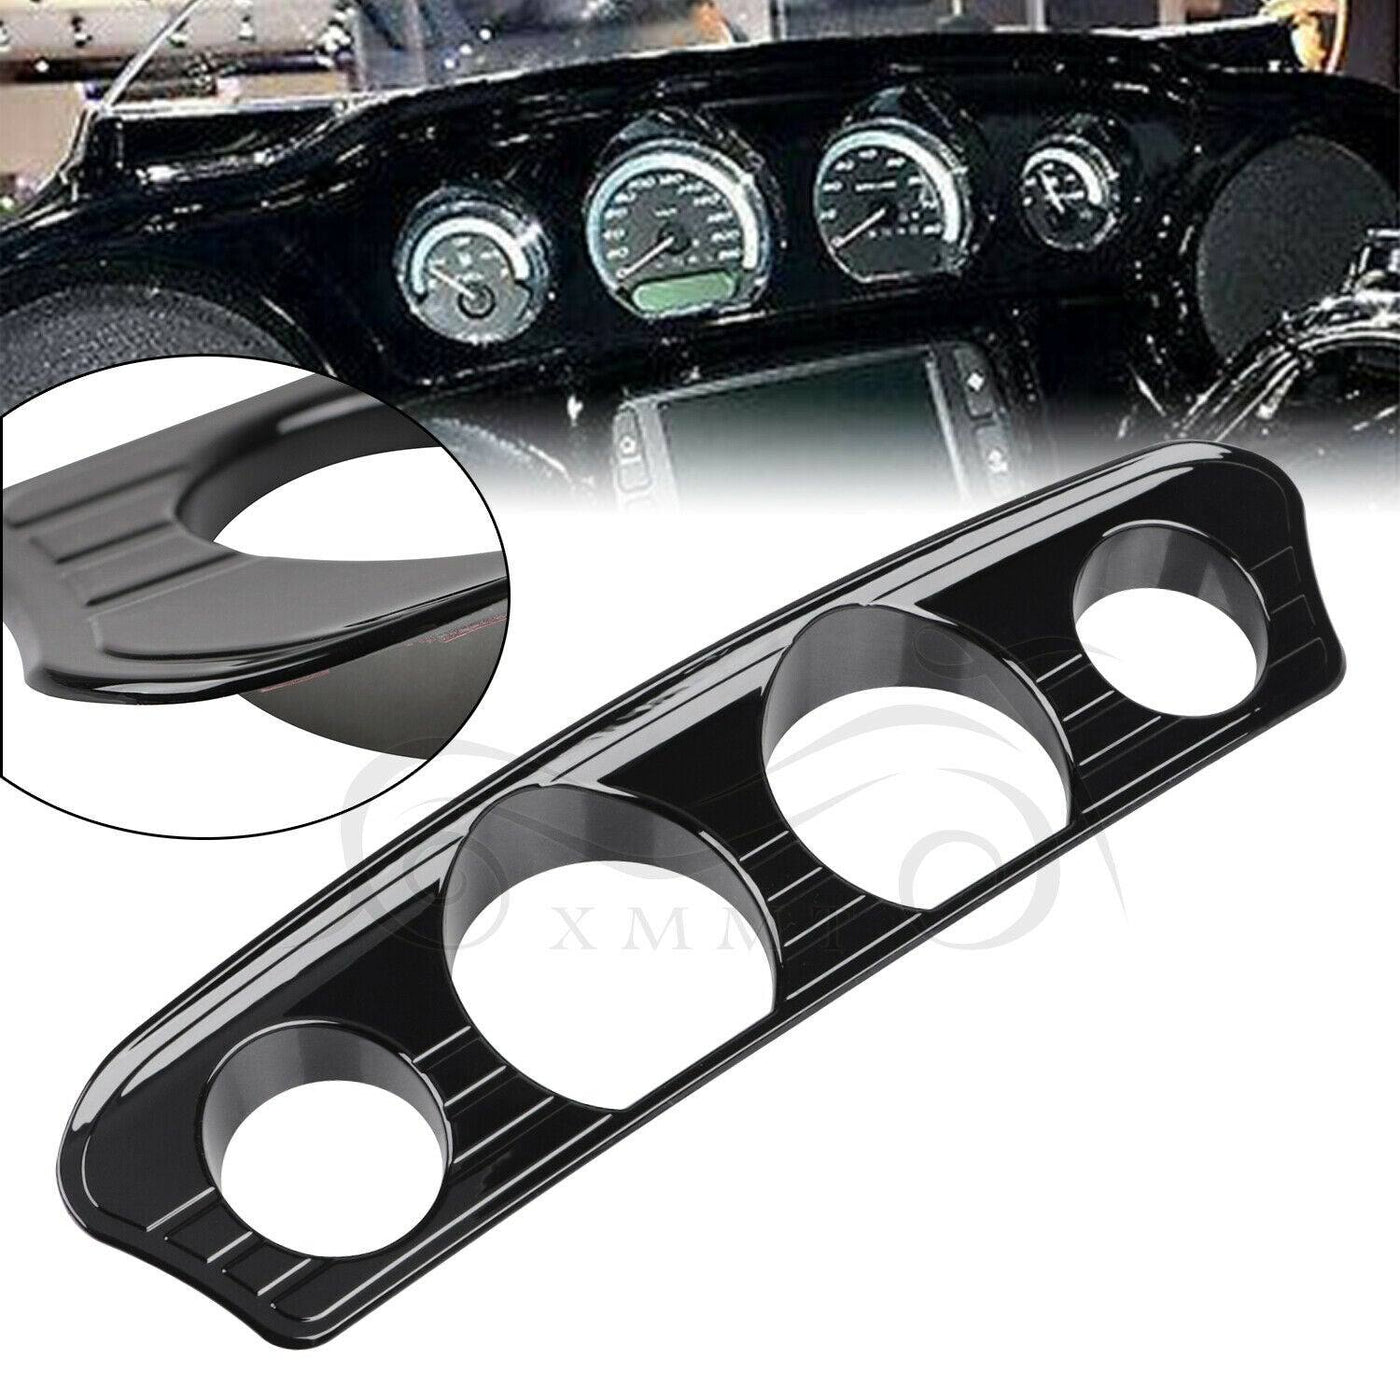 Black Gauge Bezel Stereo Trim Plate For Harley Electra Street Tri Glide Classic - Moto Life Products